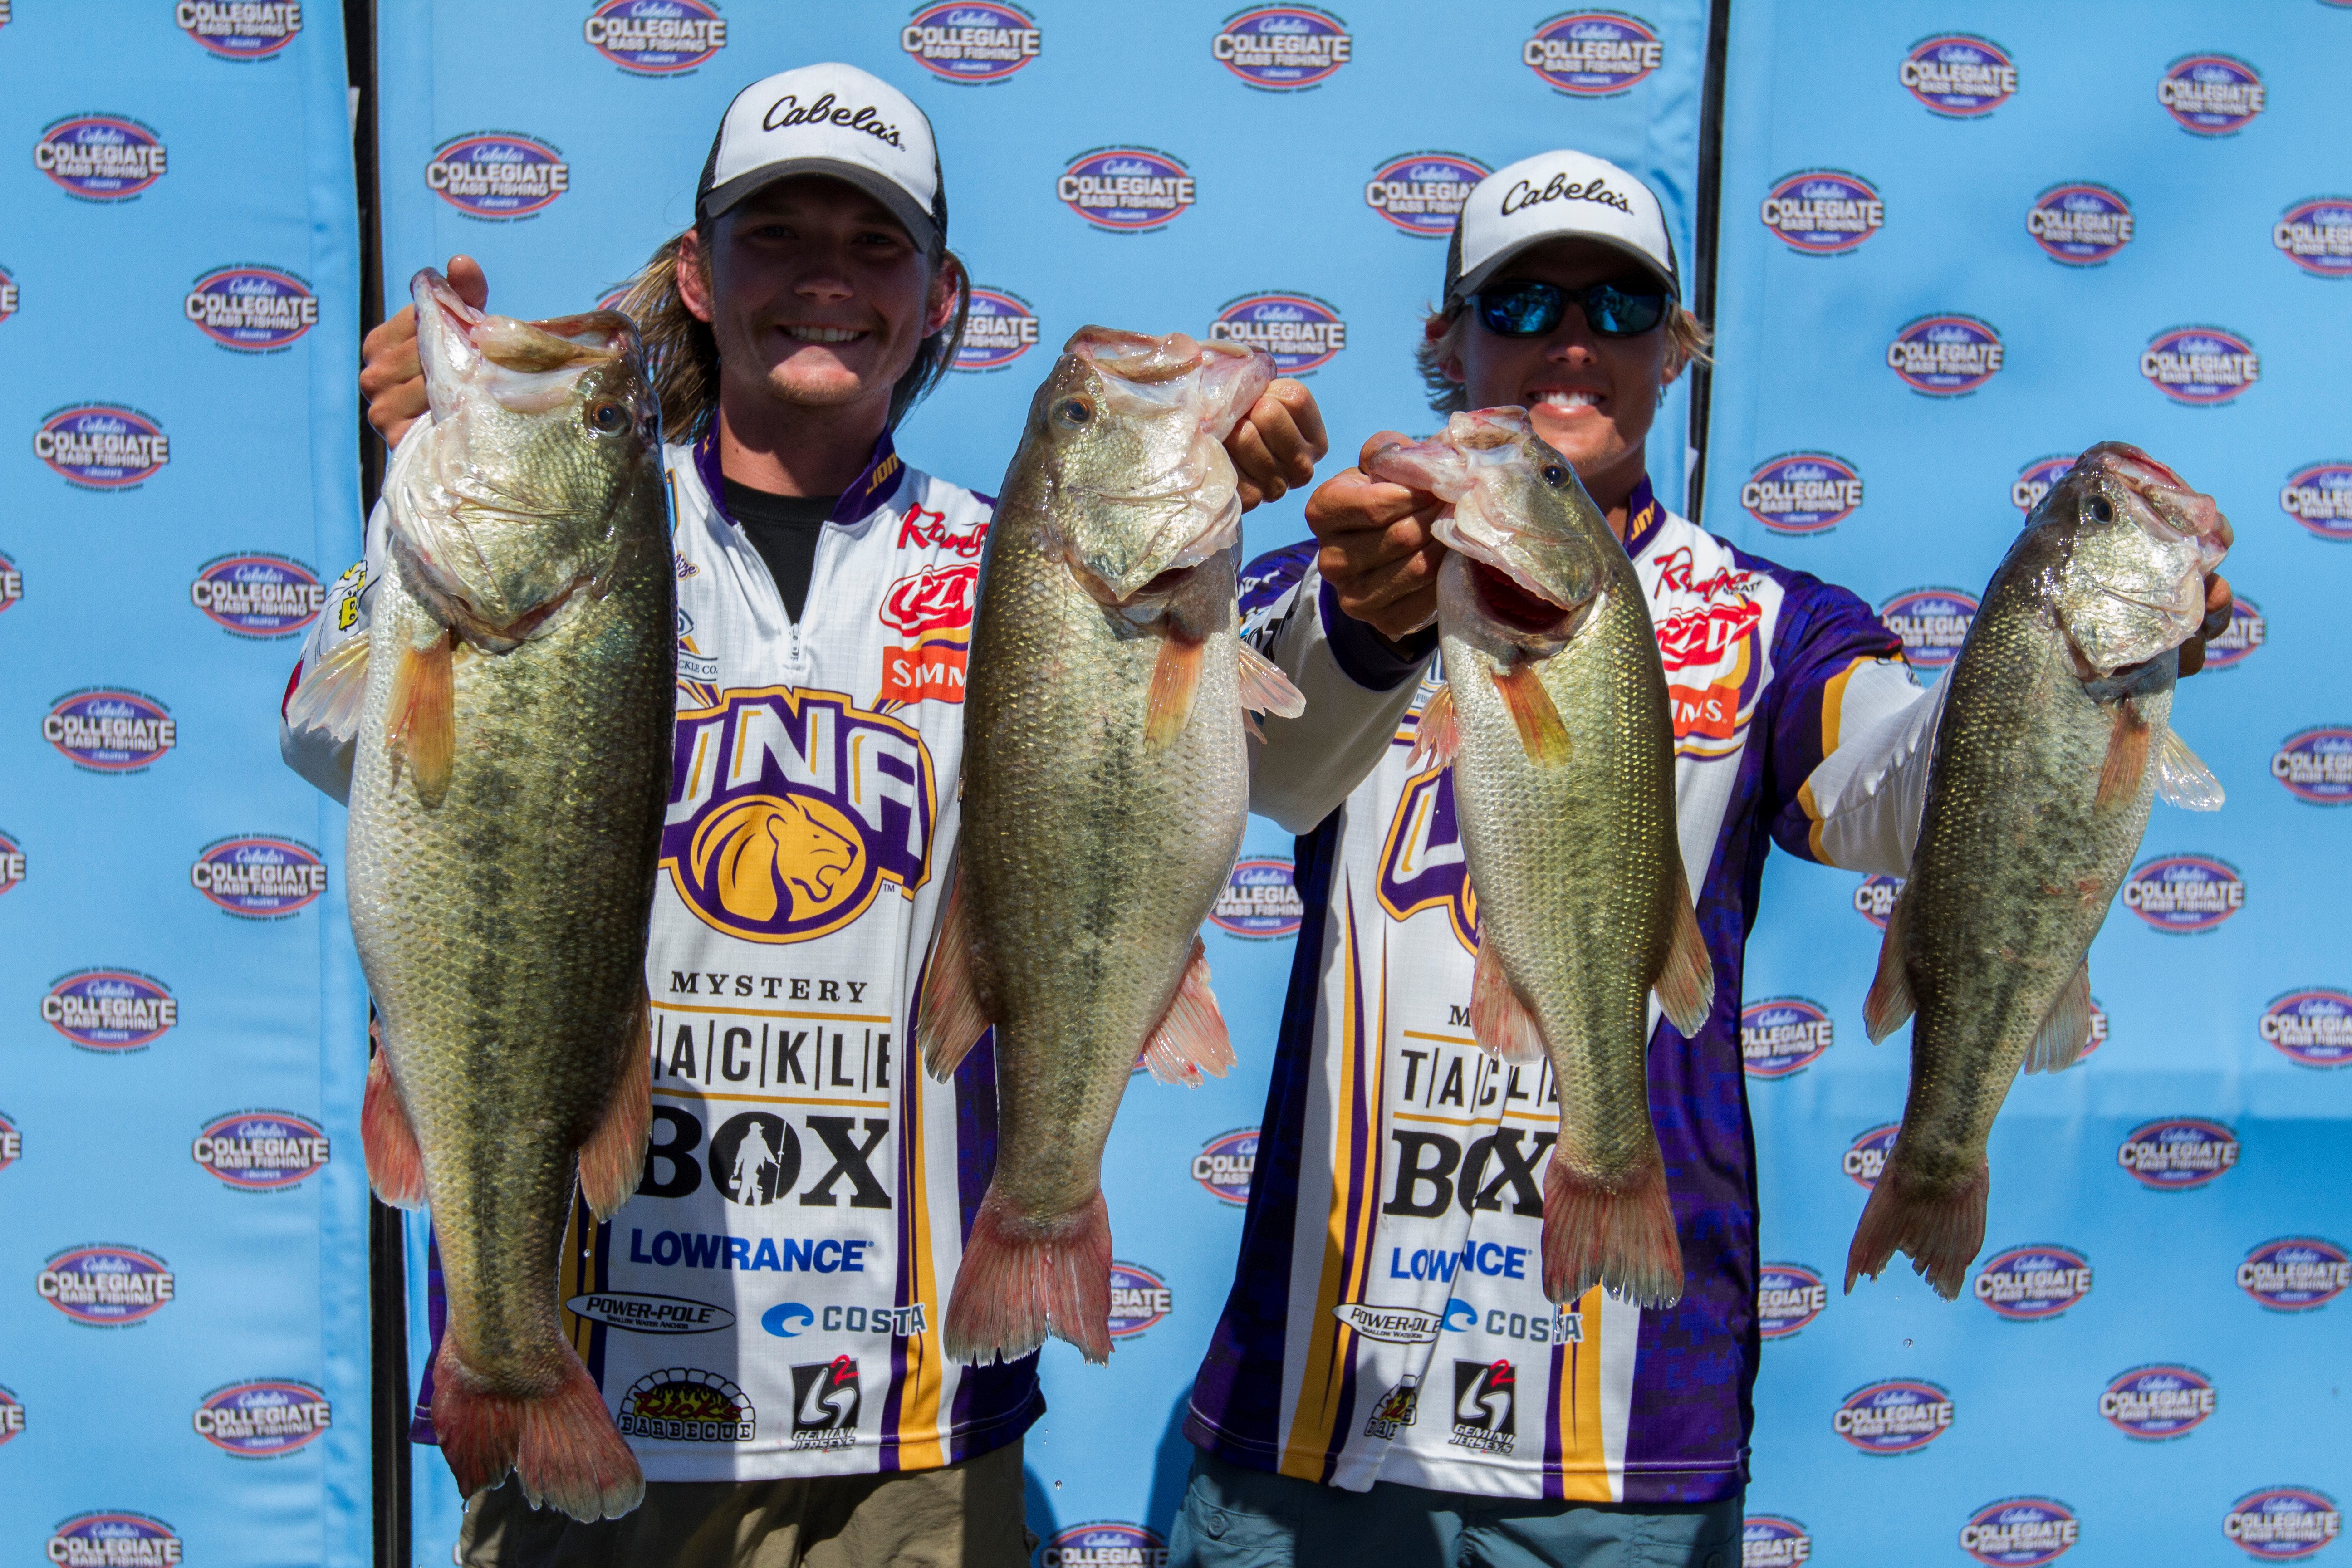 From 15th to 5th Martin and Mize from the University of North Alabama Come  Charging Back on Day 2 of the 2017 BoatUS Collegiate Bass Fishing  Championship presented by Cabela's - Collegiate Bass Championship